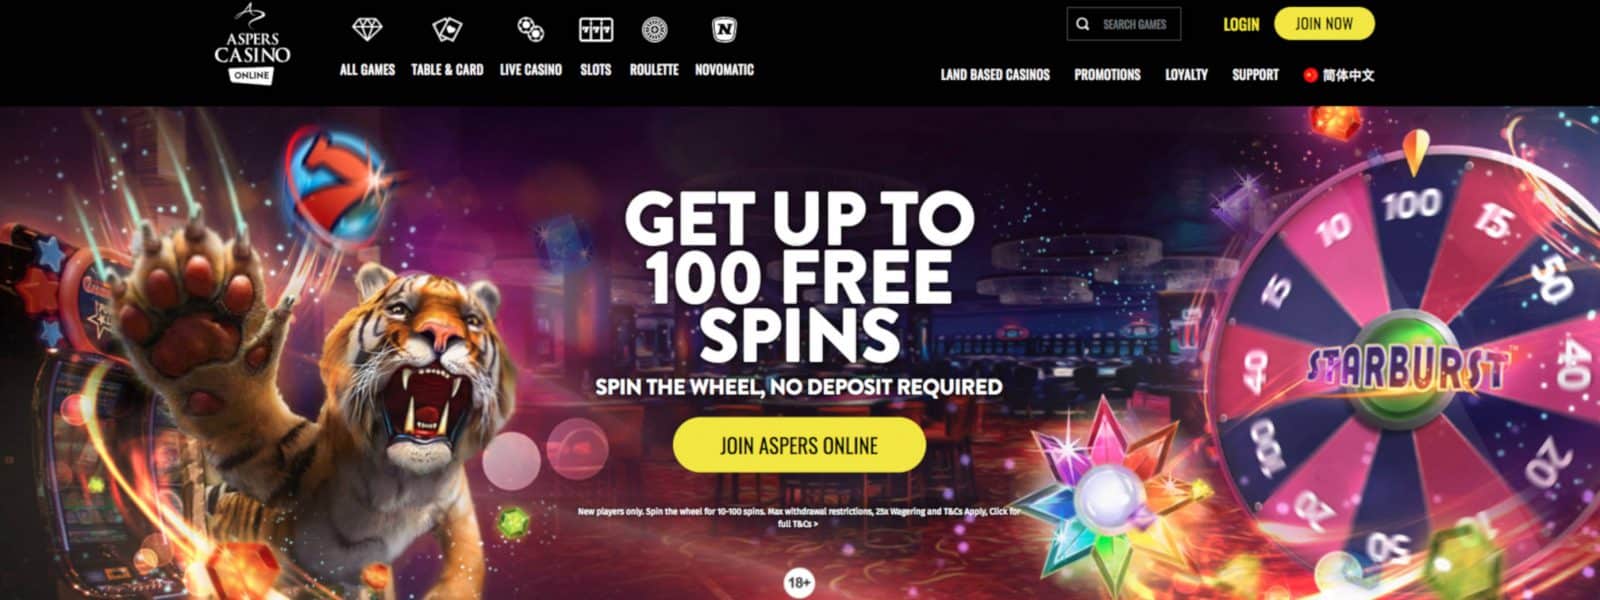 aspers casino free spins